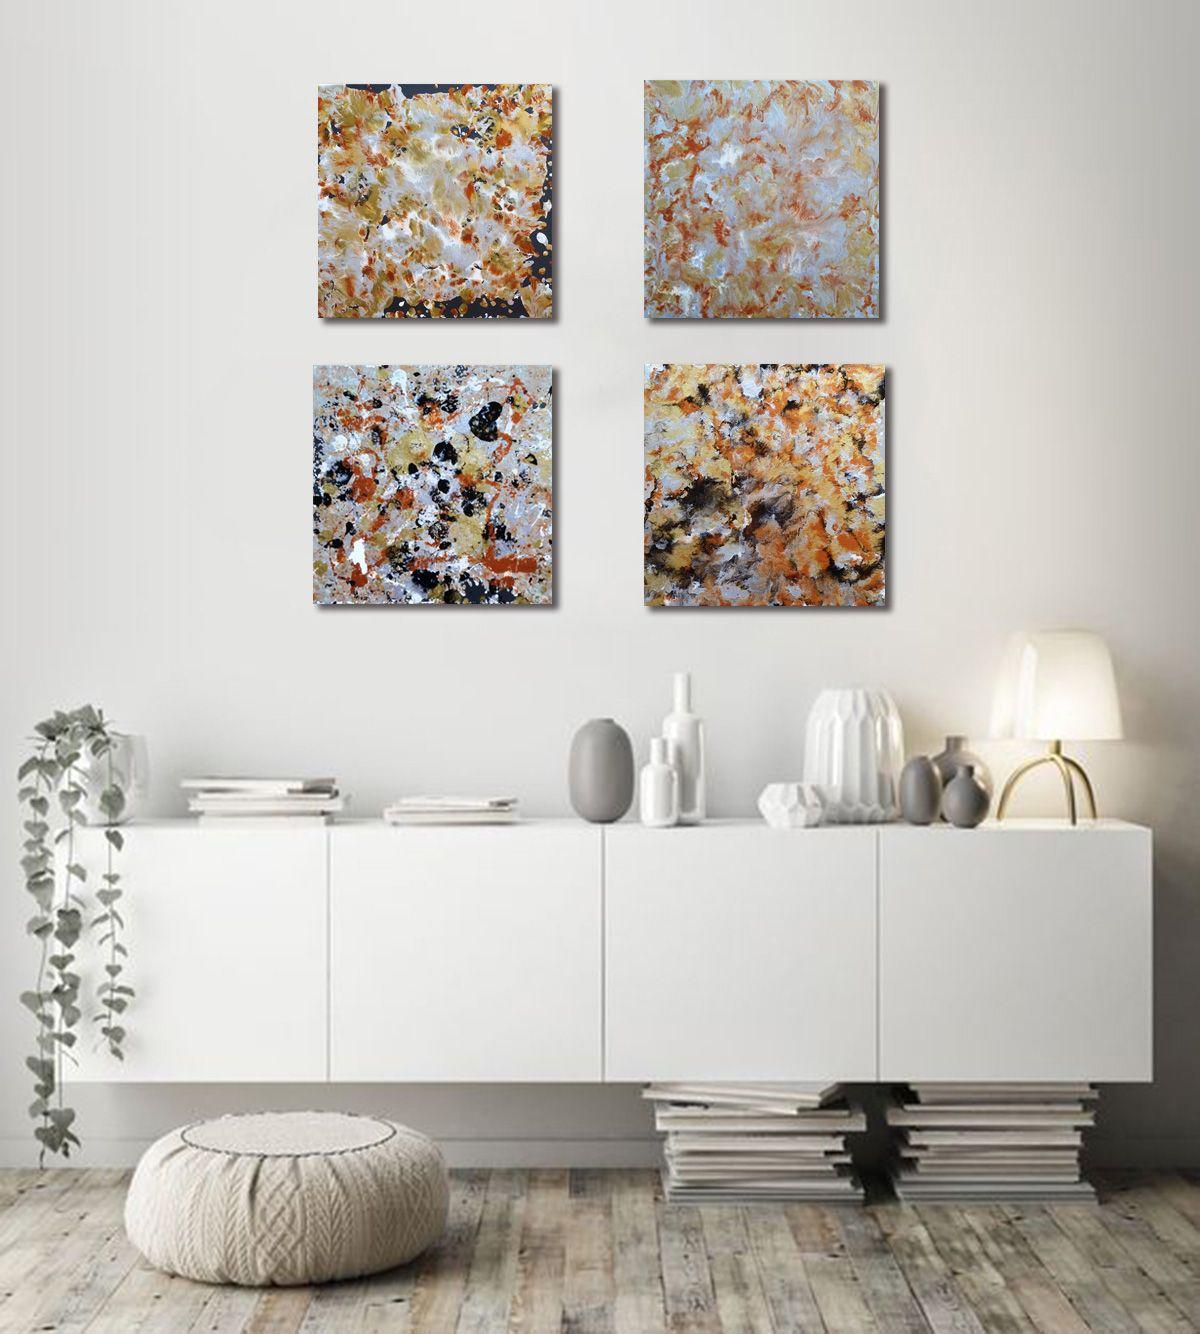 Title: Fluid I, II, III, IV  Medium: Mixed Media on Gallery Wrapped Canvas' (4 Panels)   Size: 12 W x 12 H x 1.5 in  30 x 30 x 4 cm /each   Total Size: 24